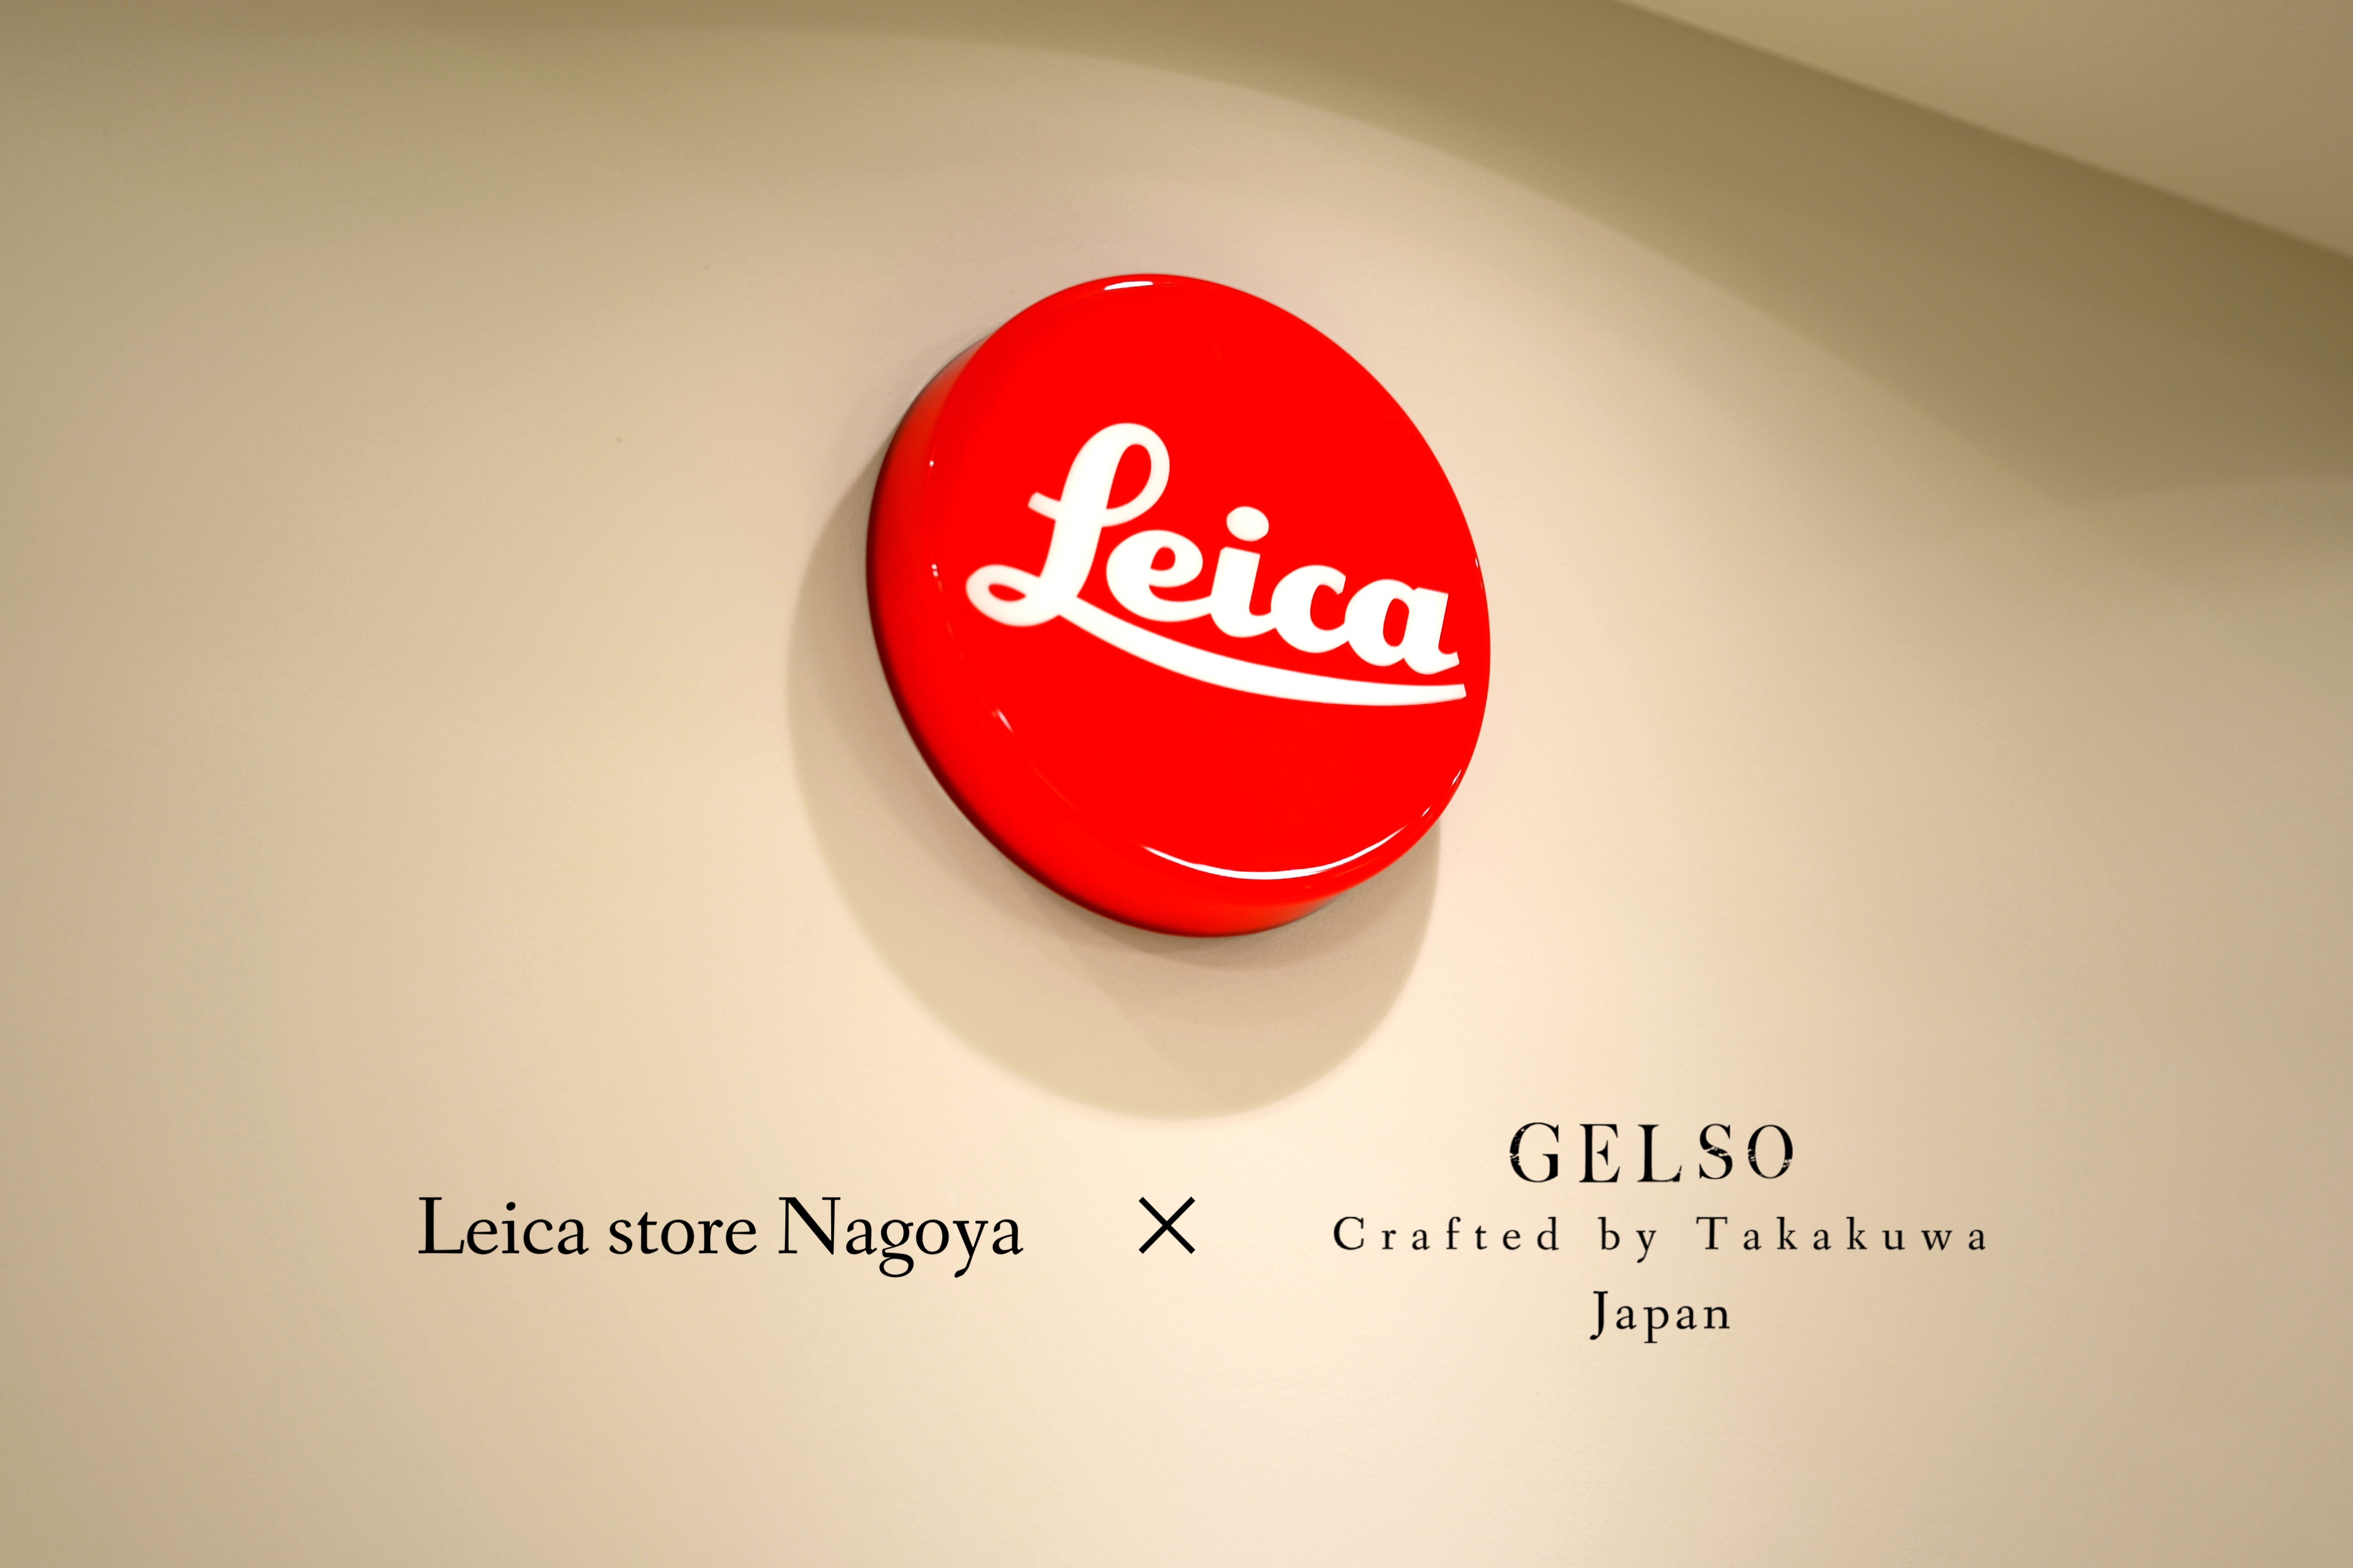 Leica × GELSO